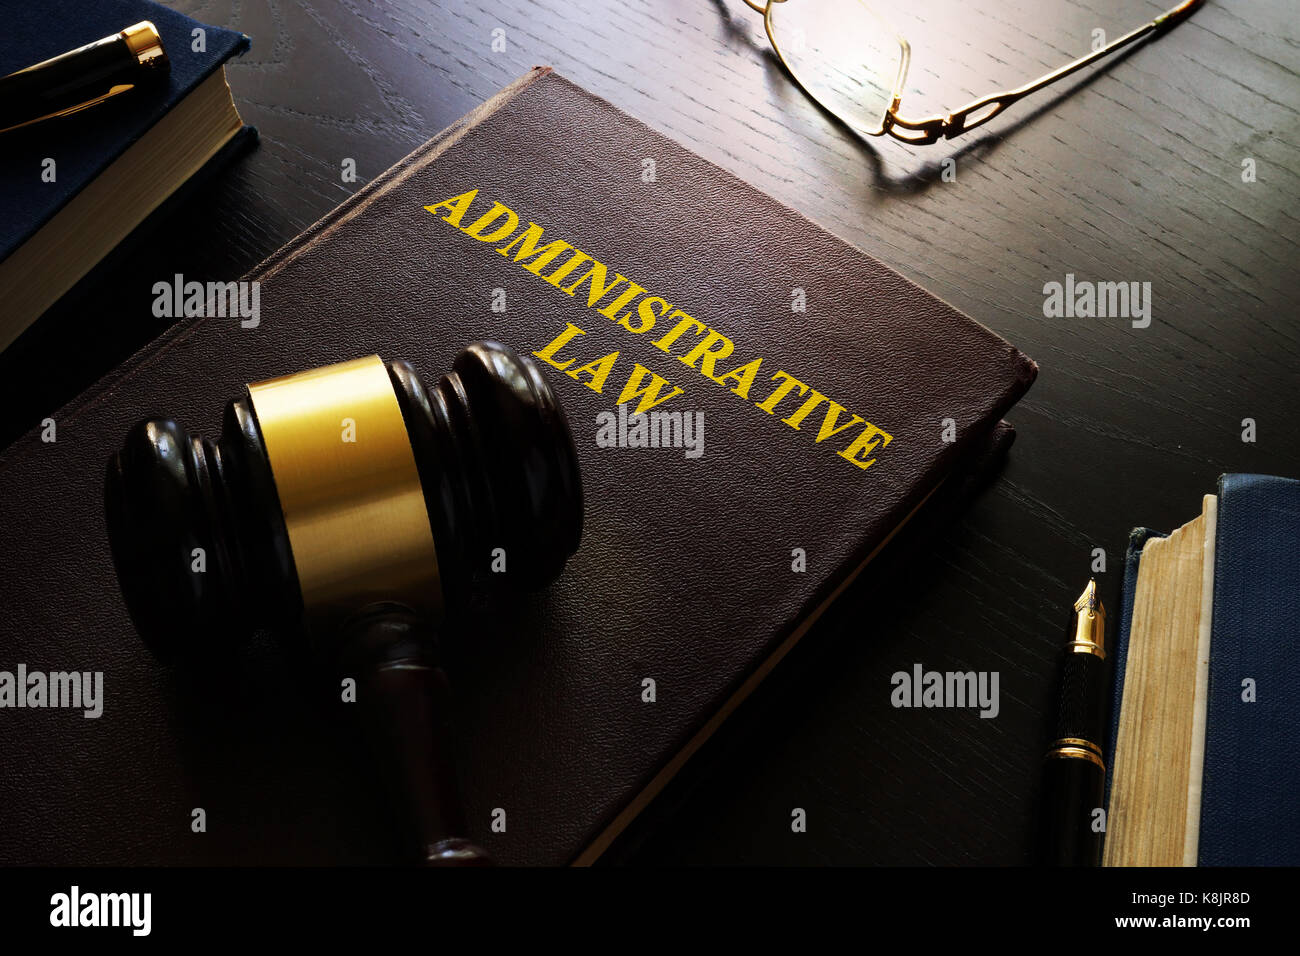 Administrative law and gavel on a table. Stock Photo